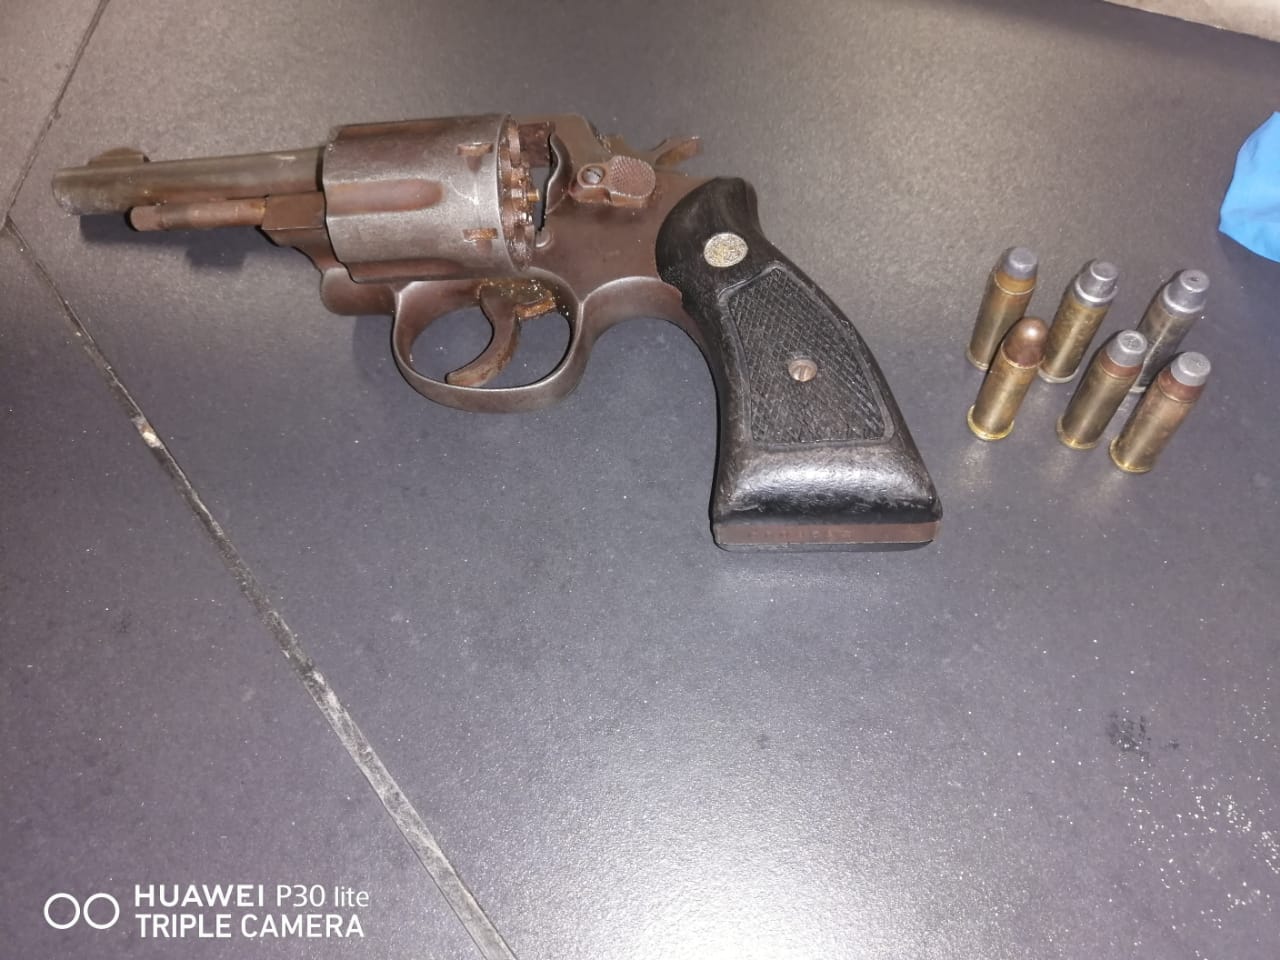 23-y20-year-old man was arrested and detained for possession of firearm - Western Capeear-old suspect was arrested on a charge of possession of an unlicensed firearm - Western Cape